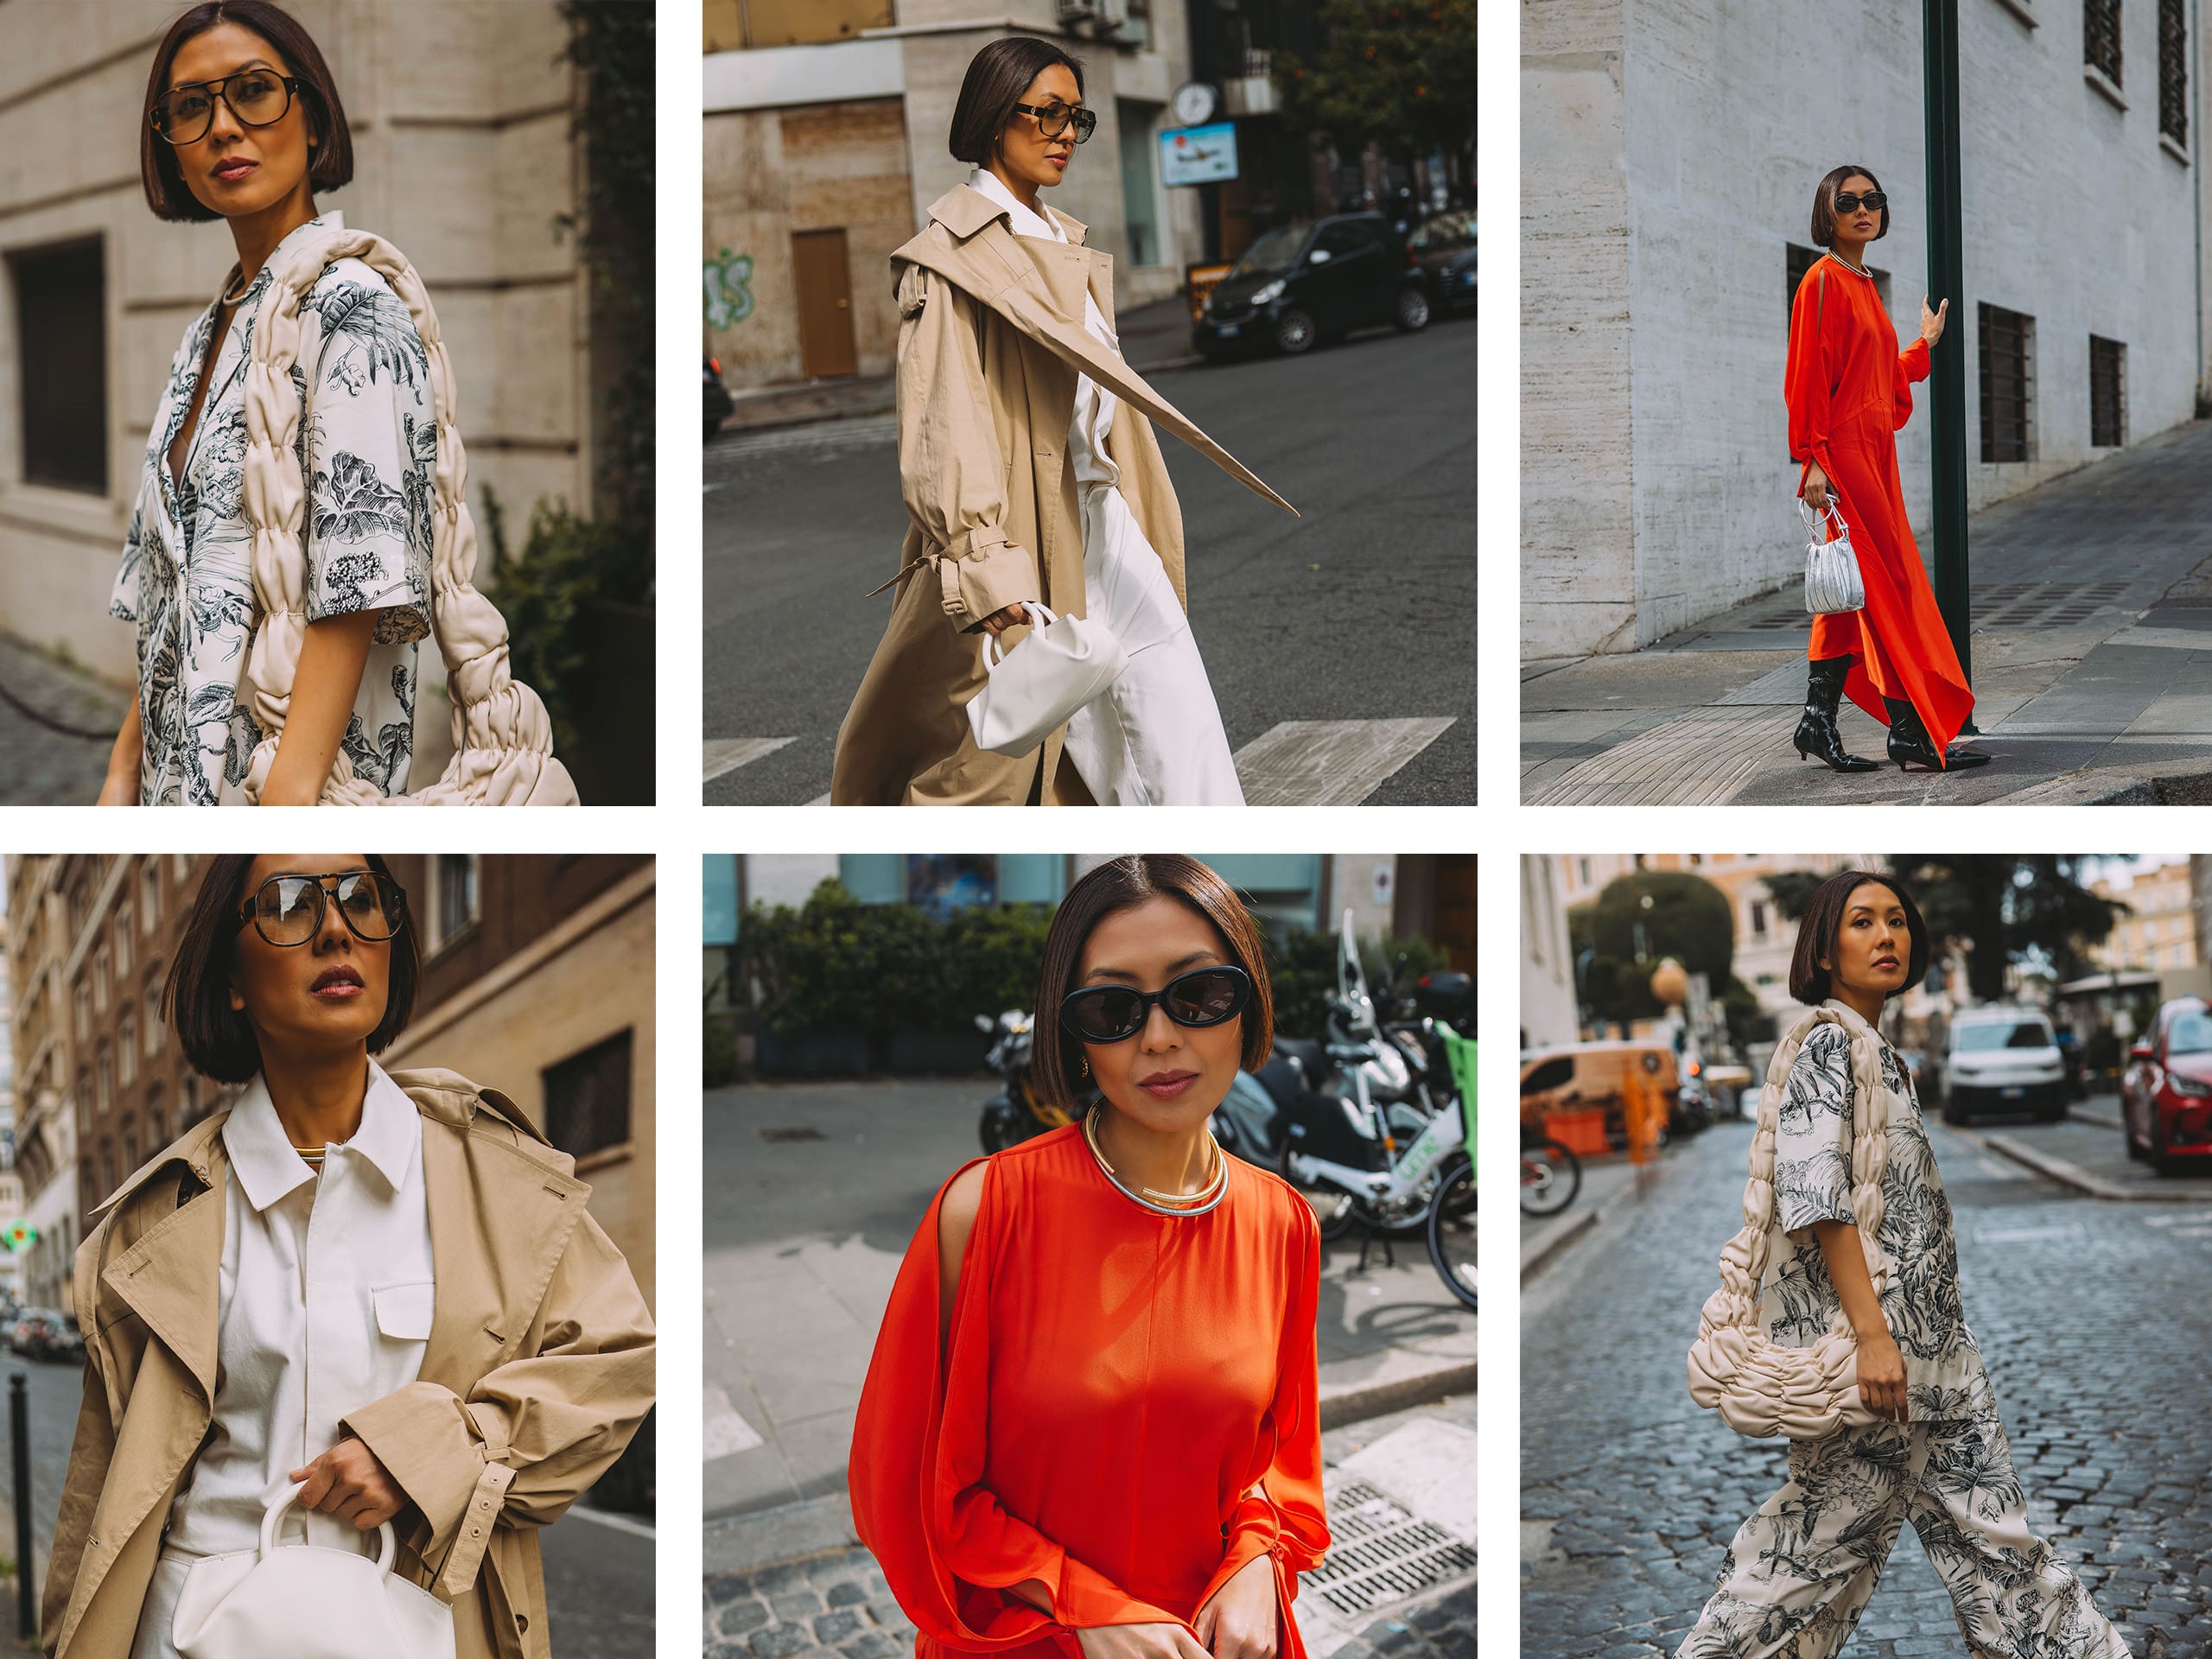 Celebrity stylist Liz Uy strolling the streets of Italy during the COS runway